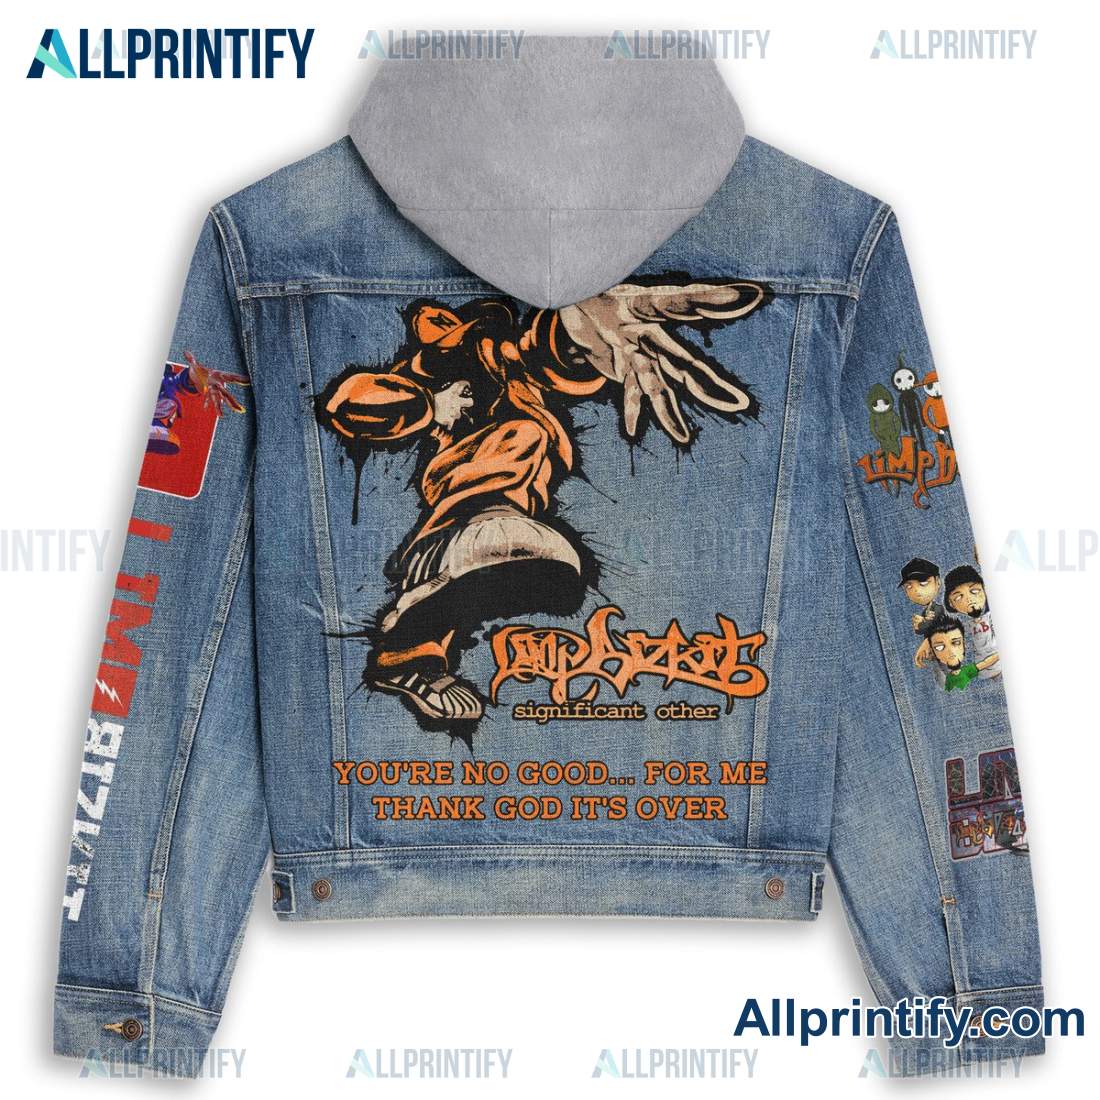 Limp Bizkit You're No Good For Me Thank God It's Over Jean Jacket Hoodie c